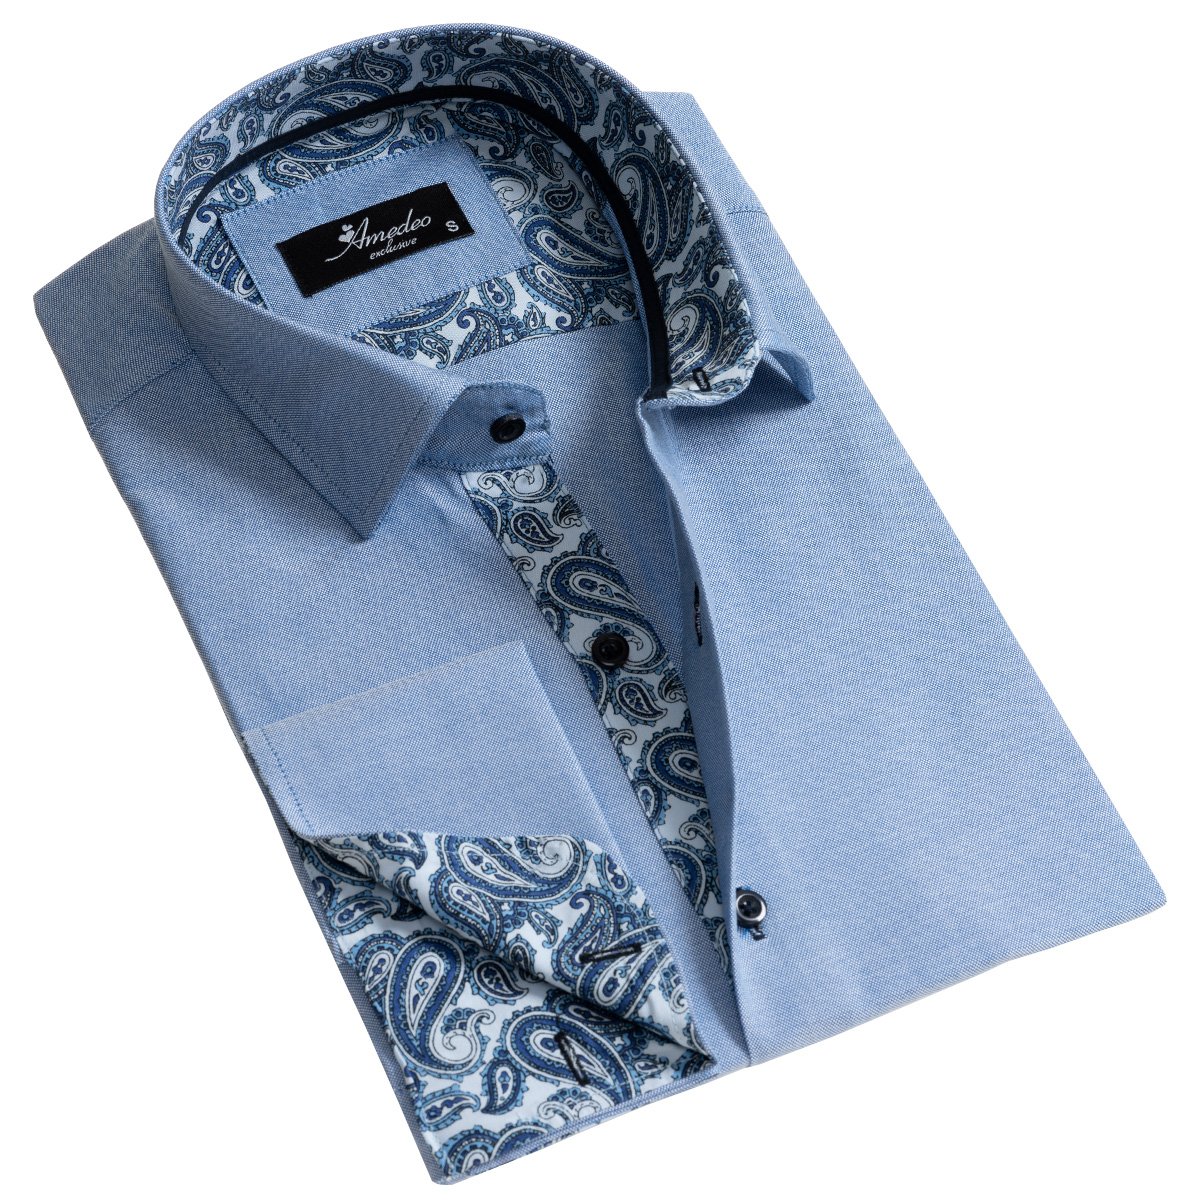 Blue Men's Slim Fit French Cuff Dress Shirts with Cufflink Holes - Casual  and Formal